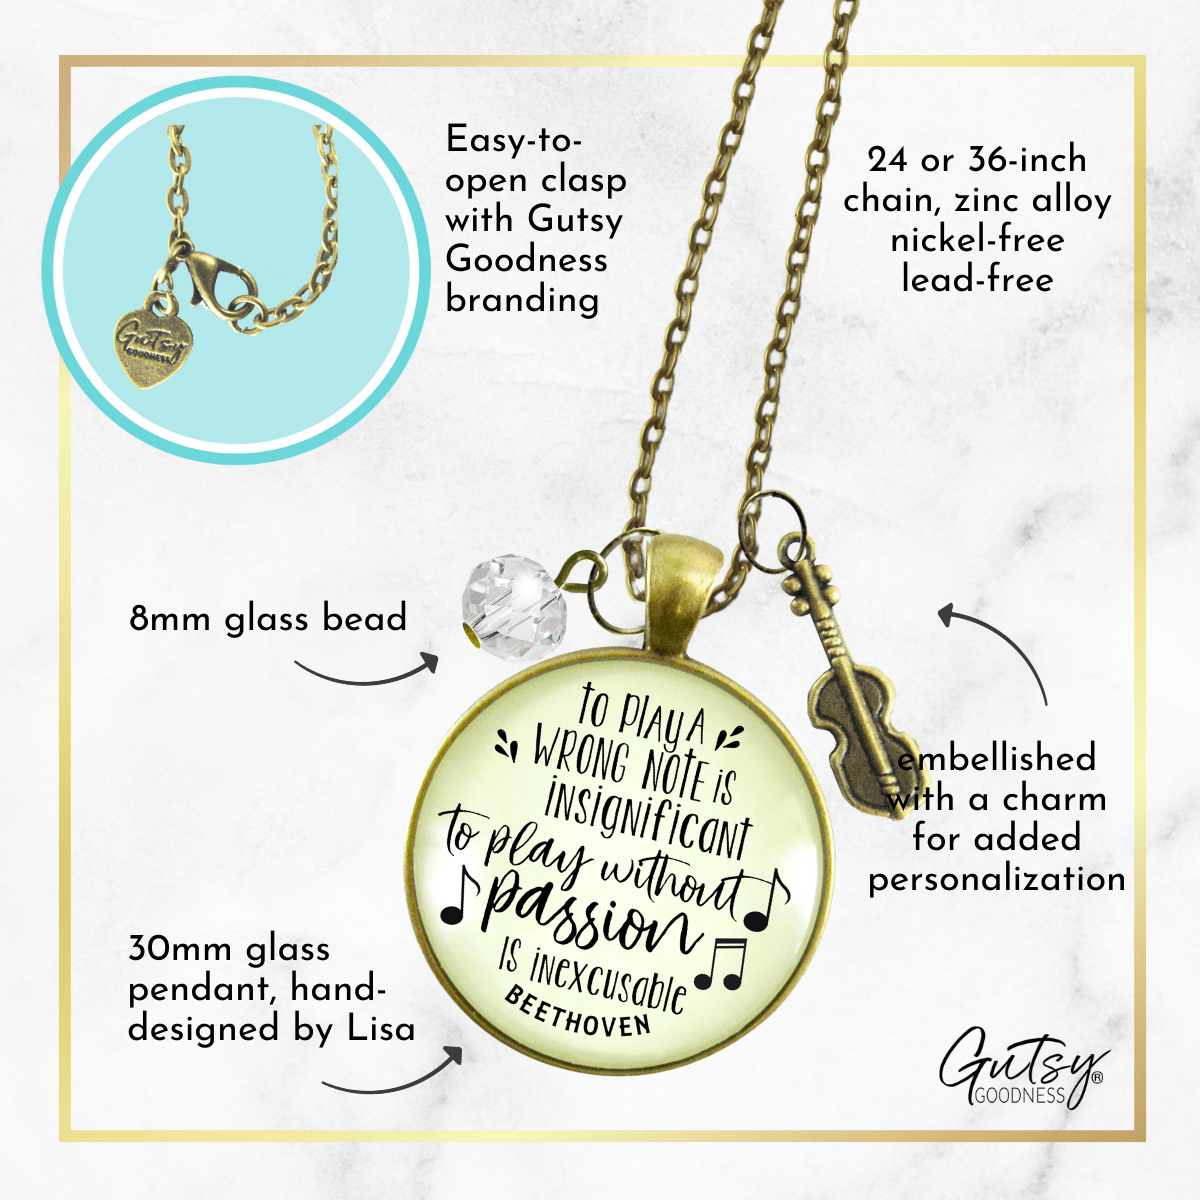 Gutsy Goodness Violin Necklace To Play Wrong Note Beethoven Quote Music Jewelry - Gutsy Goodness Handmade Jewelry;Violin Necklace To Play Wrong Note Beethoven Quote Music Jewelry - Gutsy Goodness Handmade Jewelry Gifts